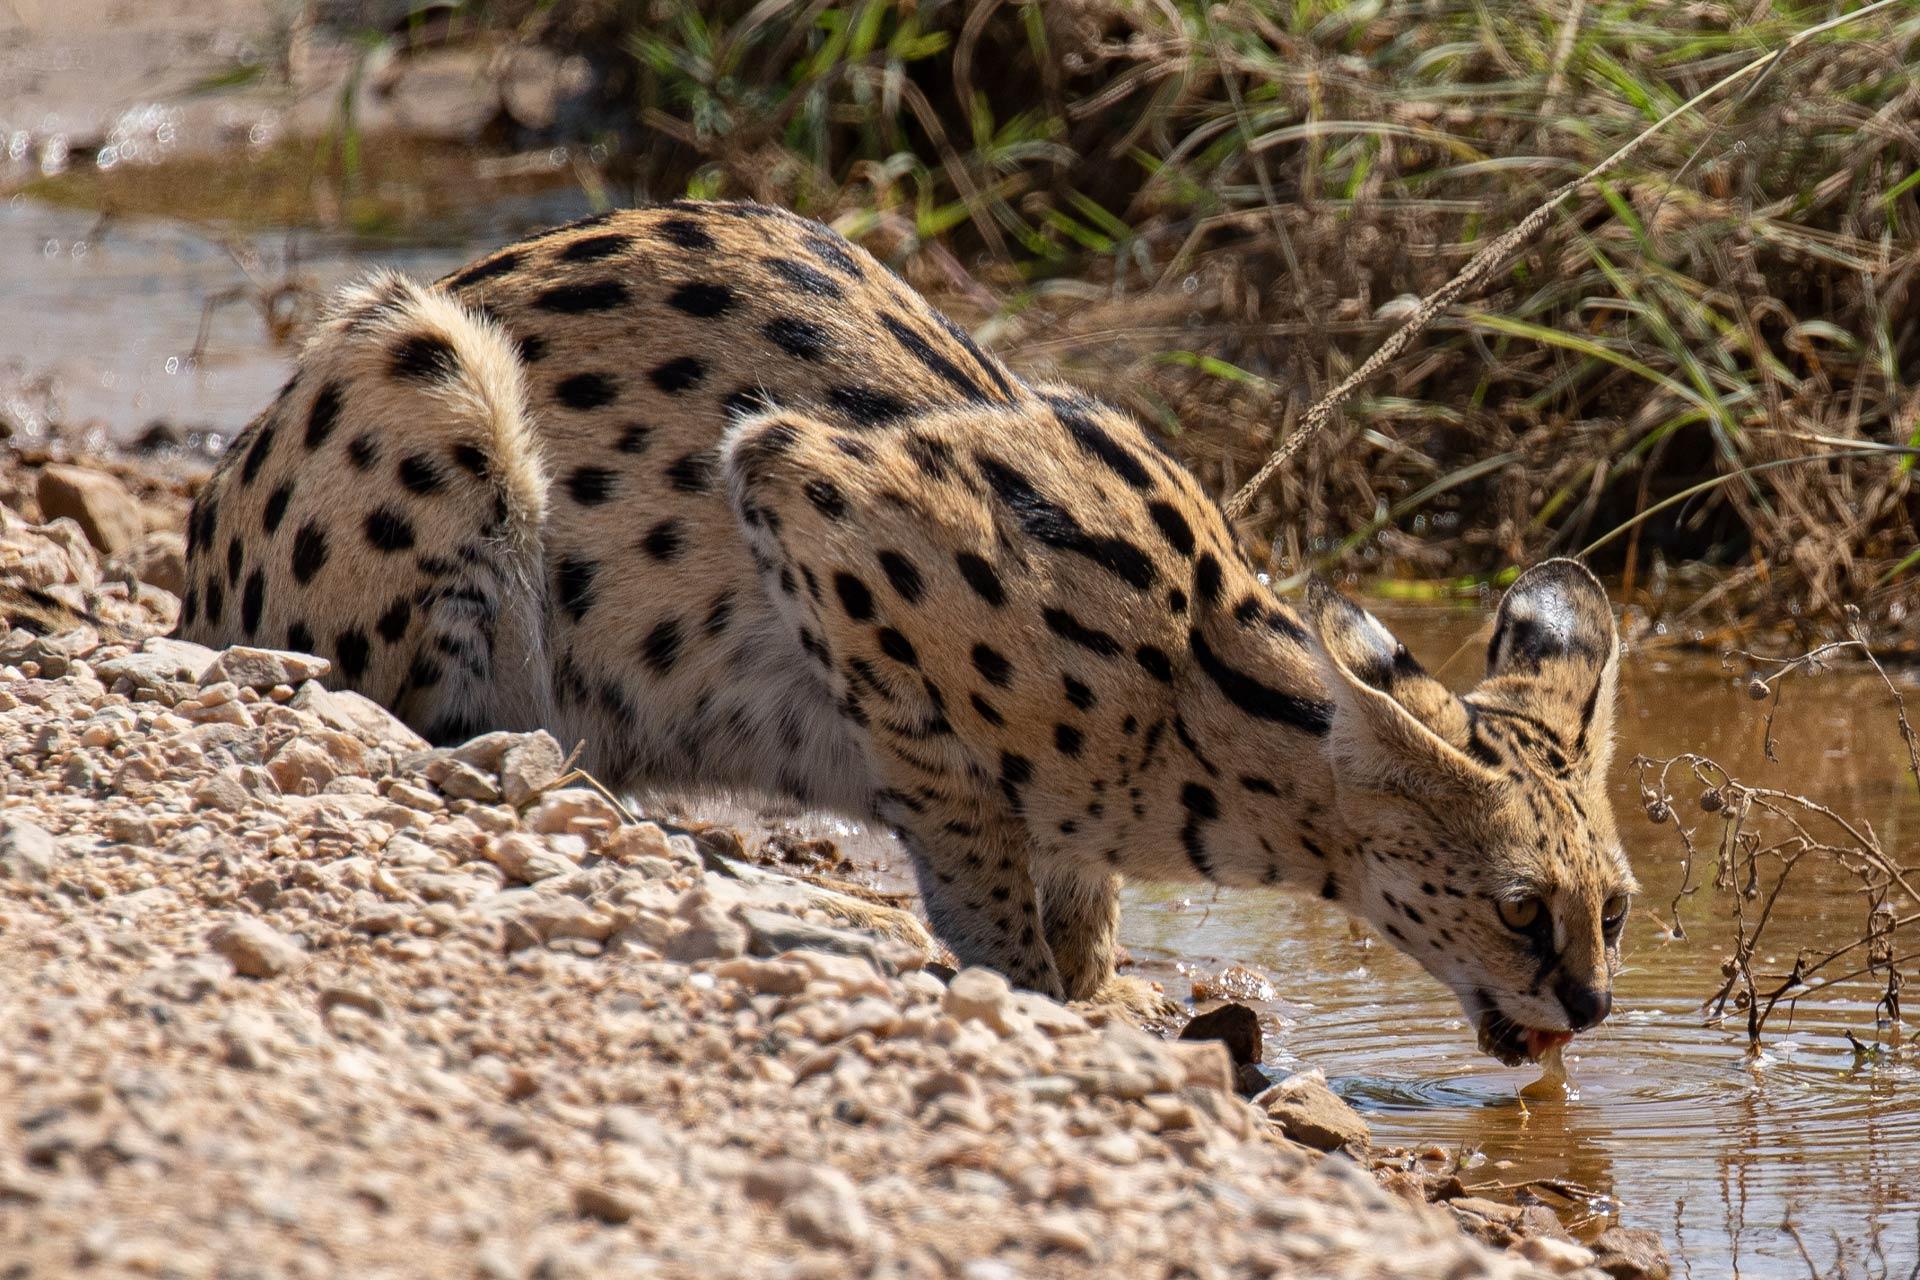 The serval (Leptailurus serval) is a wild cat native to Africa